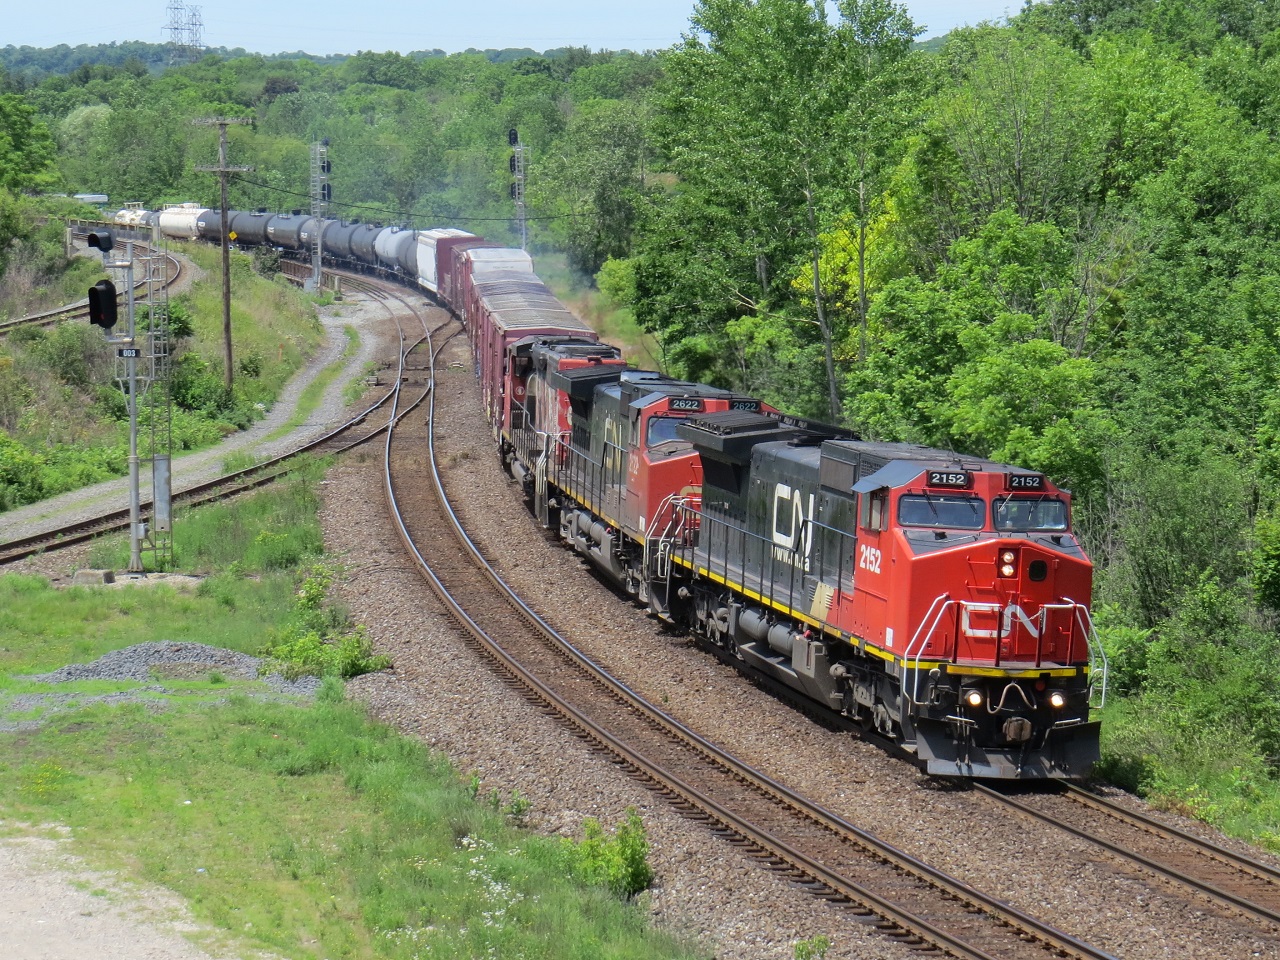 A possible CN M332 (correct me if wrong) decends the grade on the Dundas Sub while rounding the 'S' of the cow path.